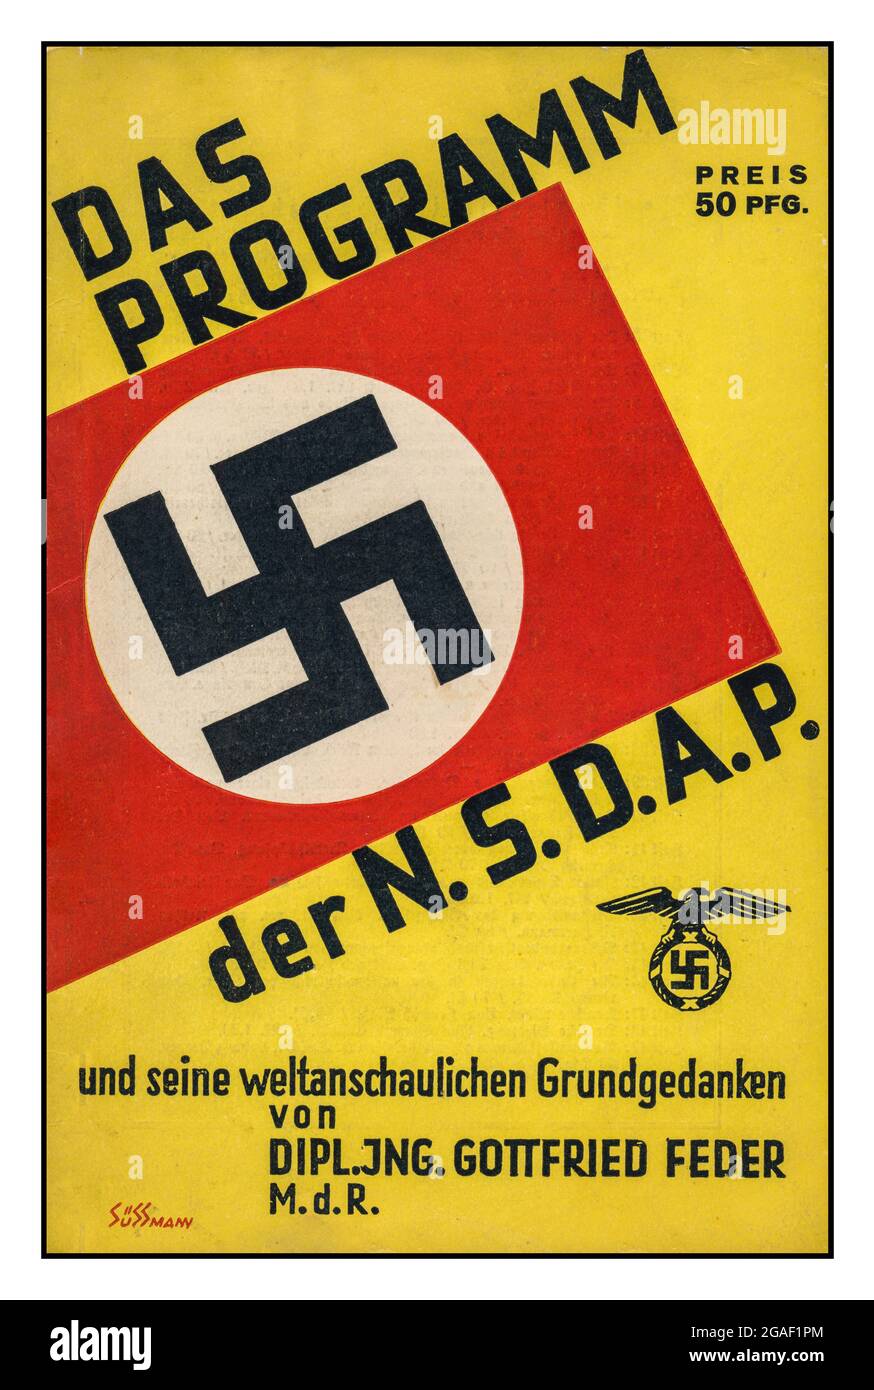 1930's  NSDAP Nazi Party Ideology propaganda booklet priced at 50 pfg  'DAS PROGRAMM der NSDAP' and the ideological basic ideas of DIPL. JNG. Gottfried Feder MdR  'und seine weltanschaulichen grundgedanken von DIPL.ING. Gottfried Feder MdR' Nazi Germany. Written by Feder one of the original founding members of the NSDAP, this booklet was the primary political document which underpinned the ideology and ideas of the future Nazi Party. Stock Photo